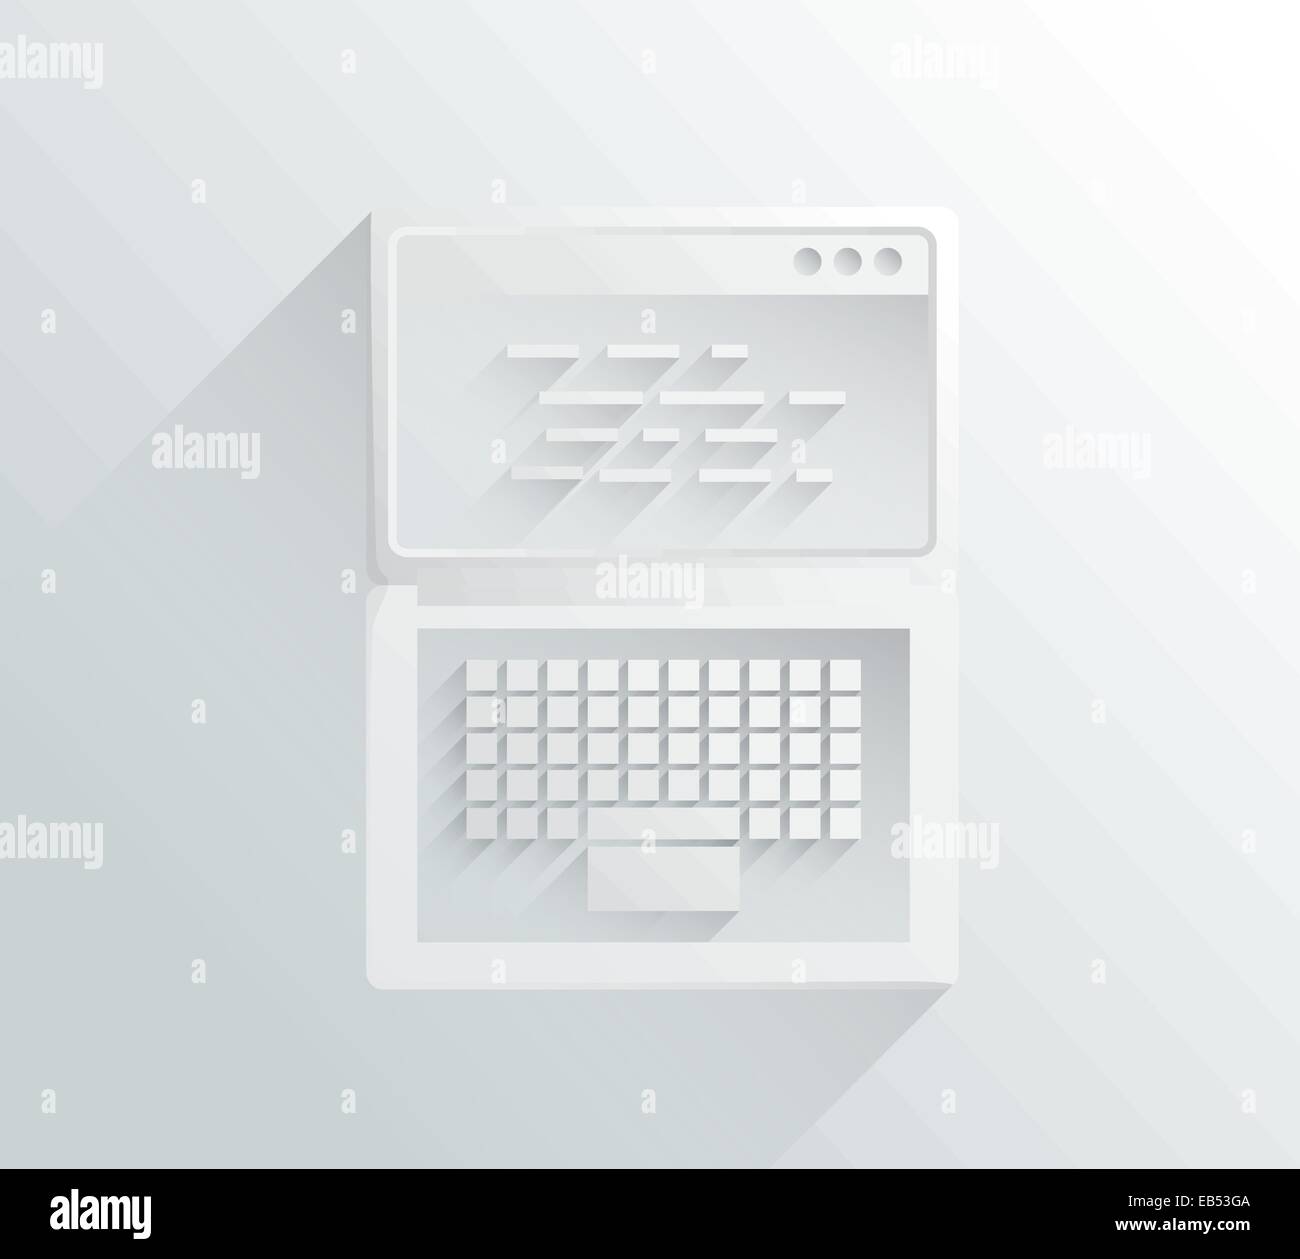 White and grey laptop in simple design Stock Vector